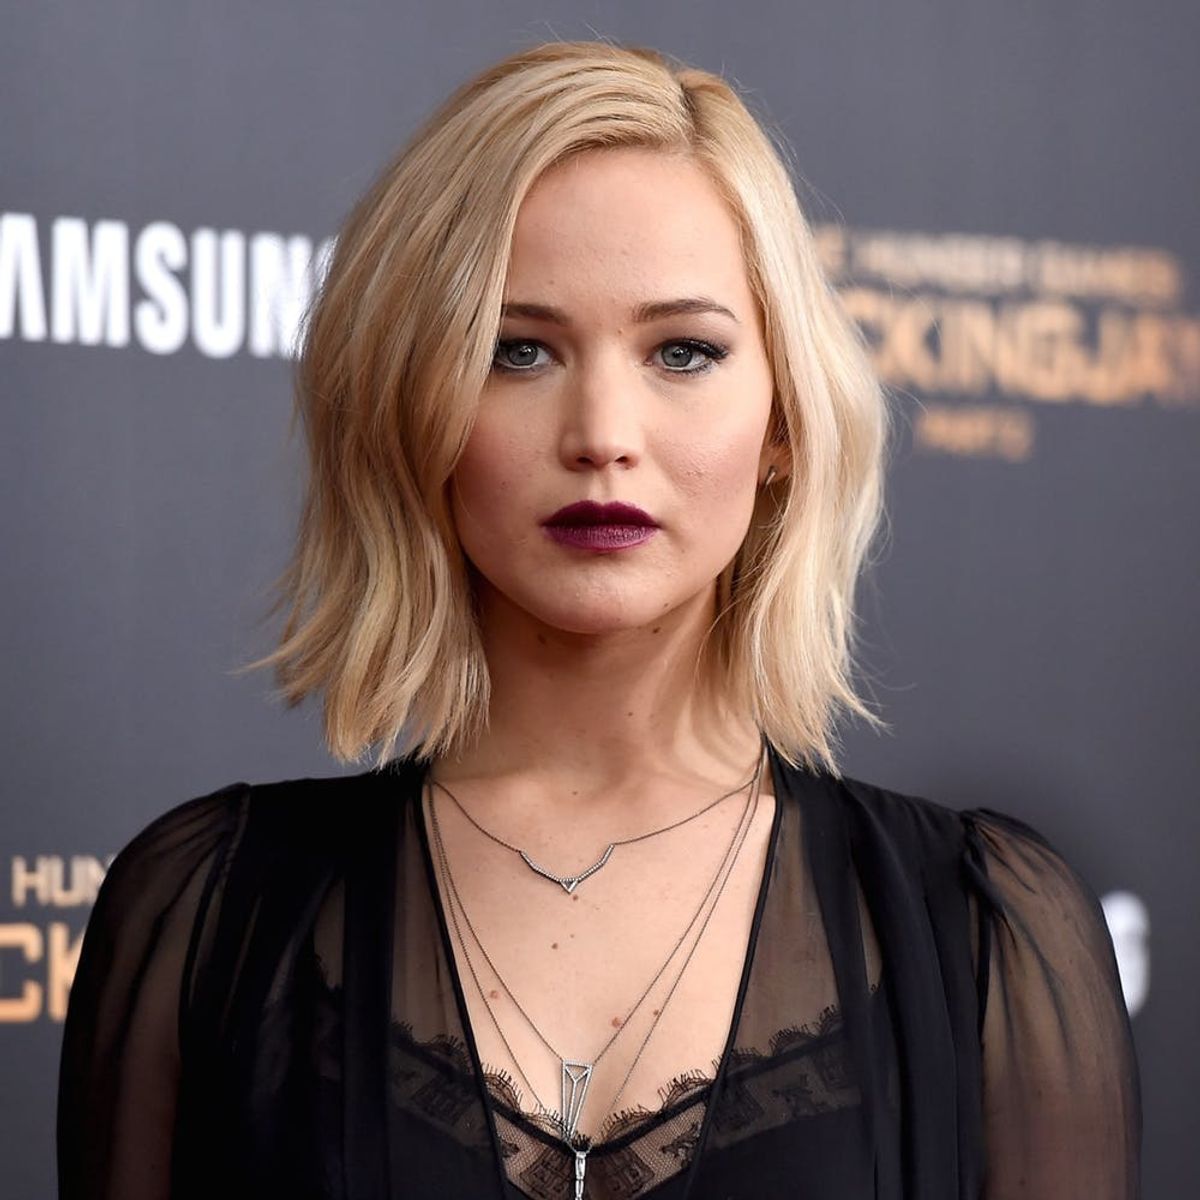 This Star Trek Character Was Named After Jennifer Lawrence